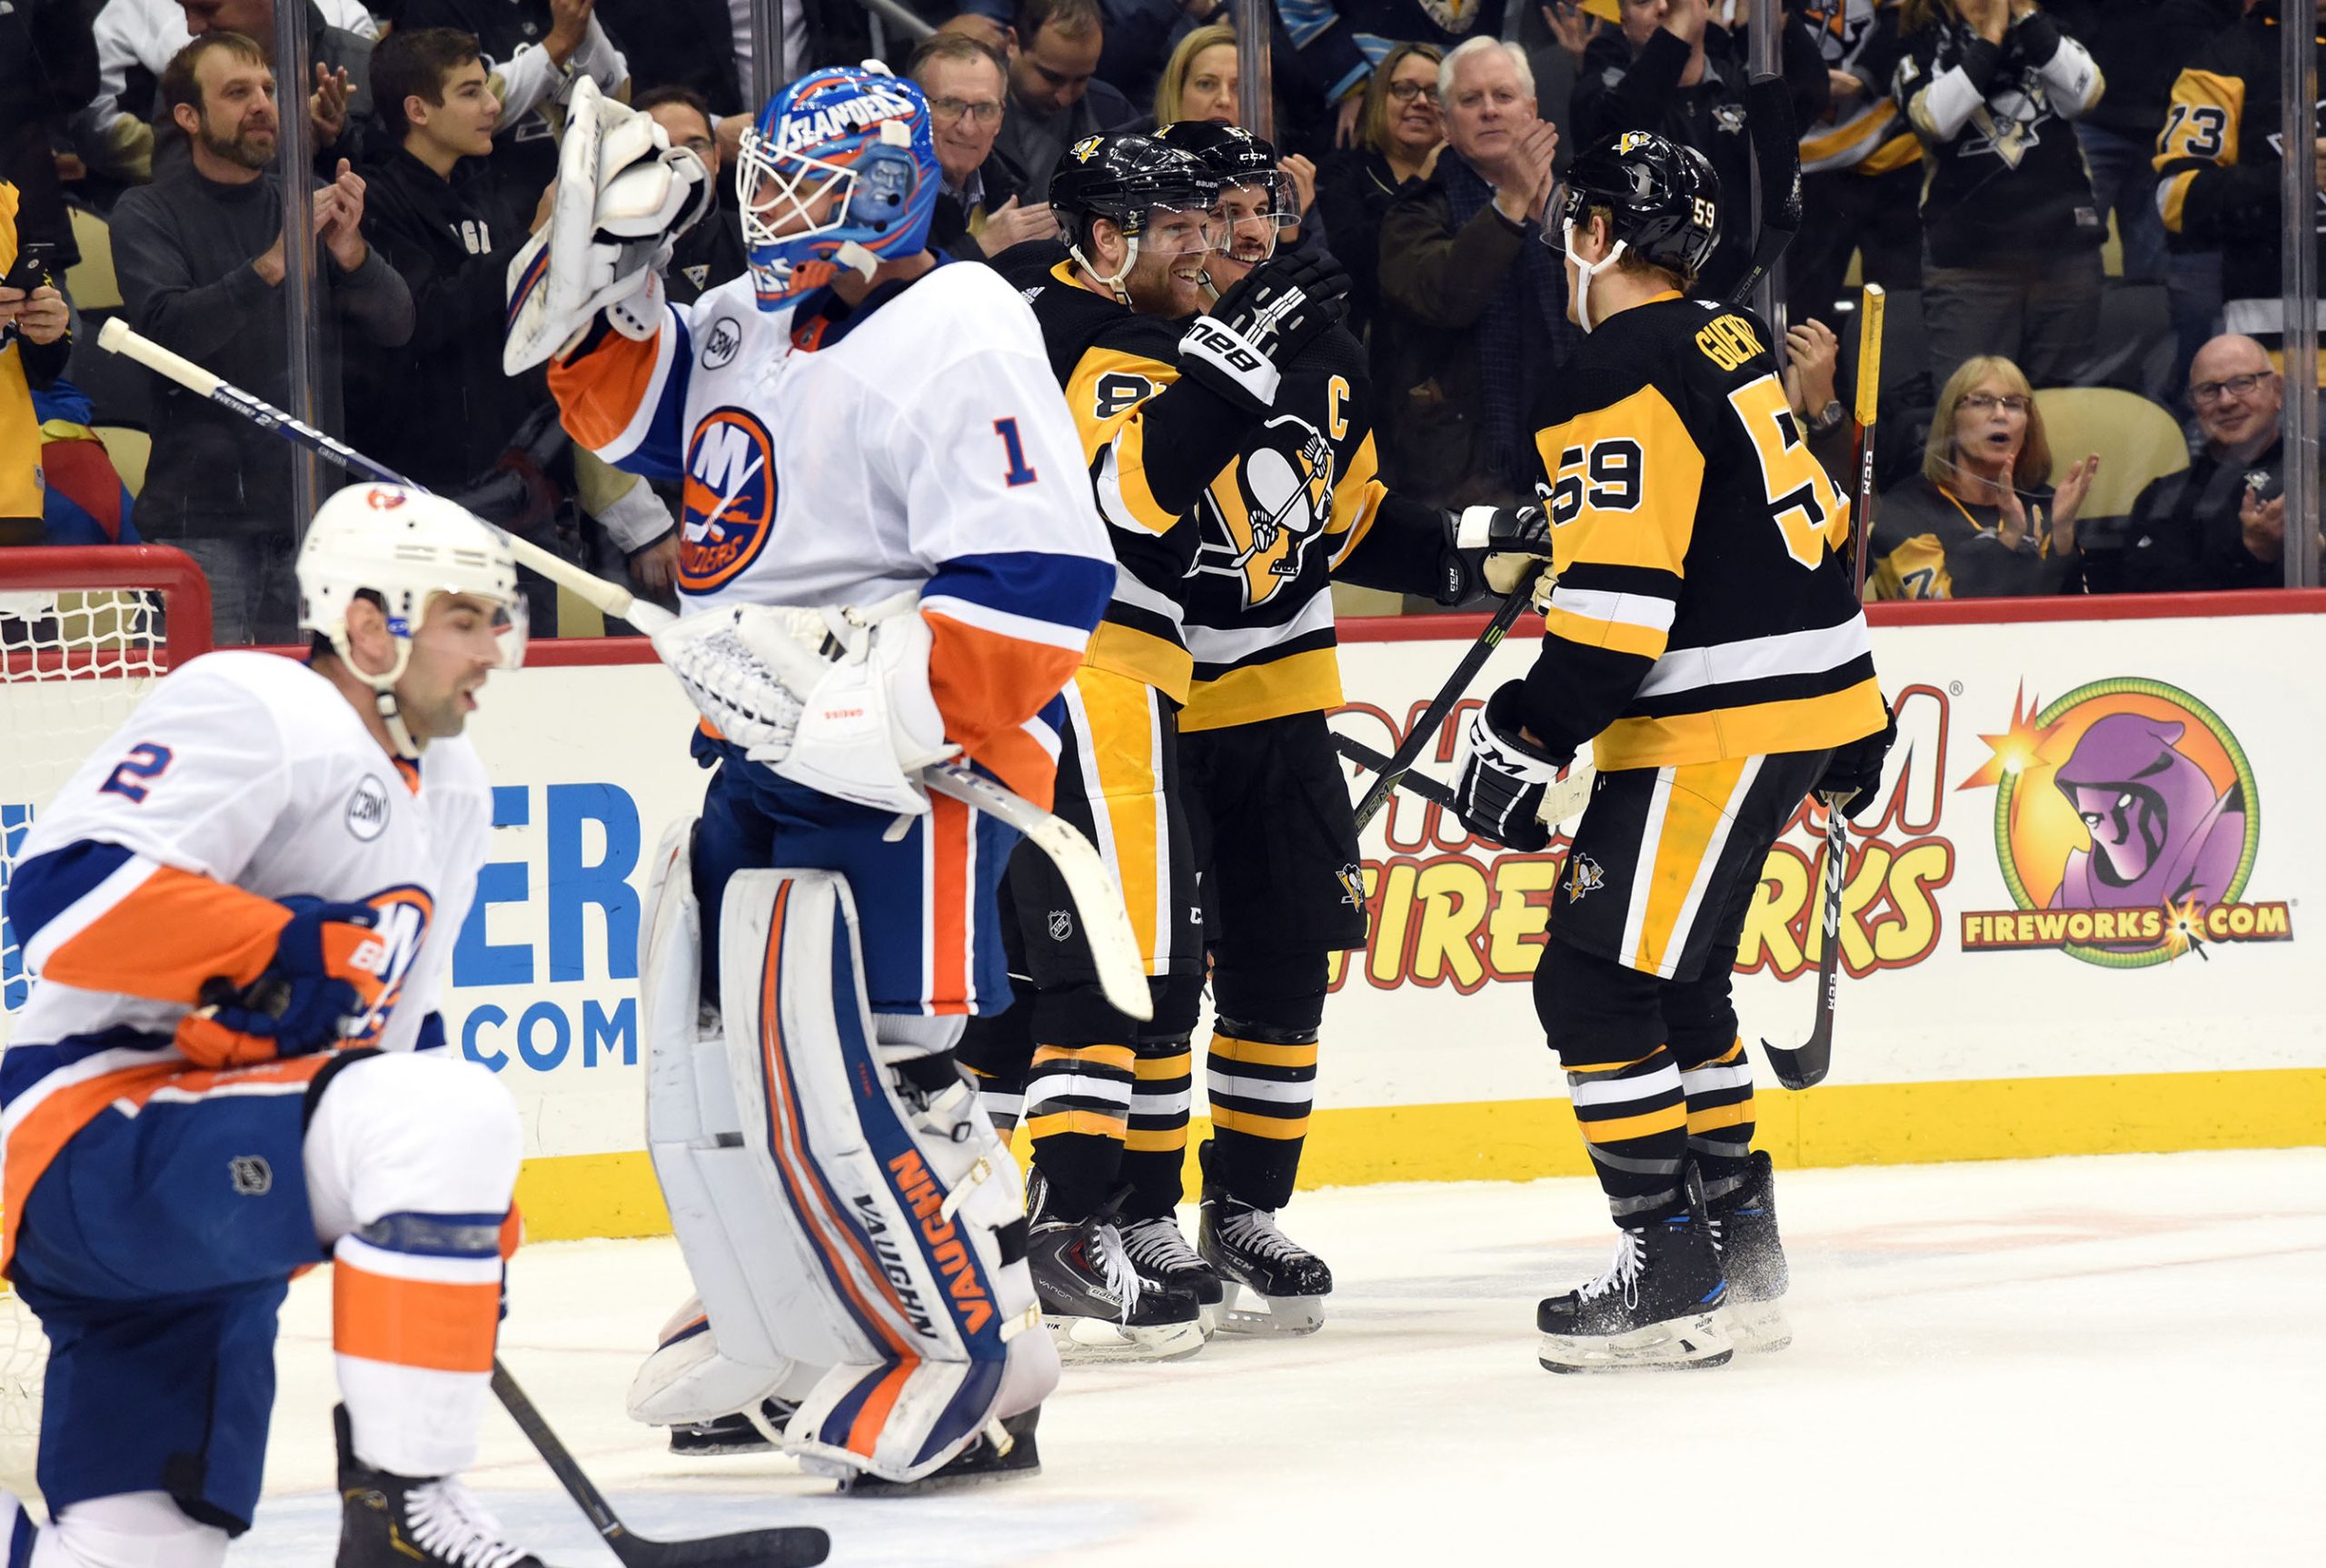 Dec 6, 2018; Pittsburgh, PA, USA; Pittsburgh Penguins winger Phil Kessel (81) celebrates a second period goal with captain Sidney Crosby (87) and winger Jake Guentzel (59) against the New York Islanders at PPG PAINTS Arena. Mandatory Credit: Philip G. Pavely-USA TODAY Sports